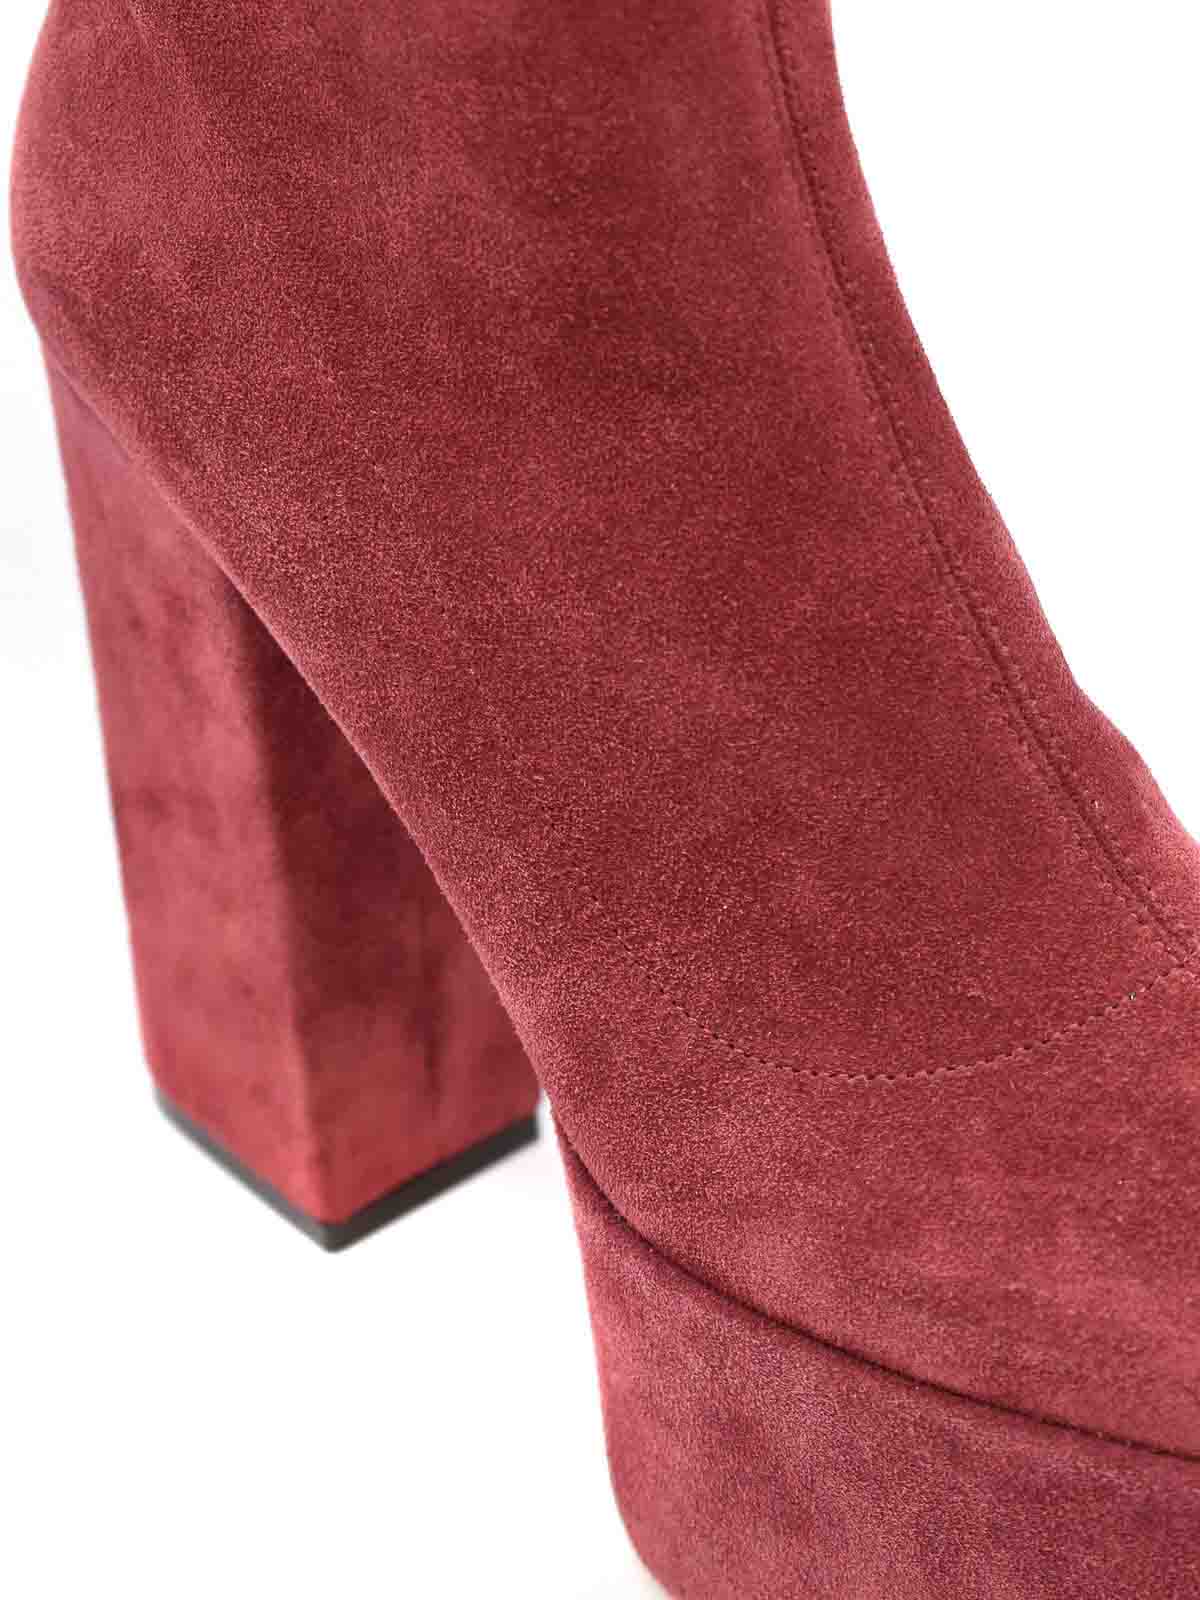 Shop Paris Texas Suede Ankle Boots In Burgundy